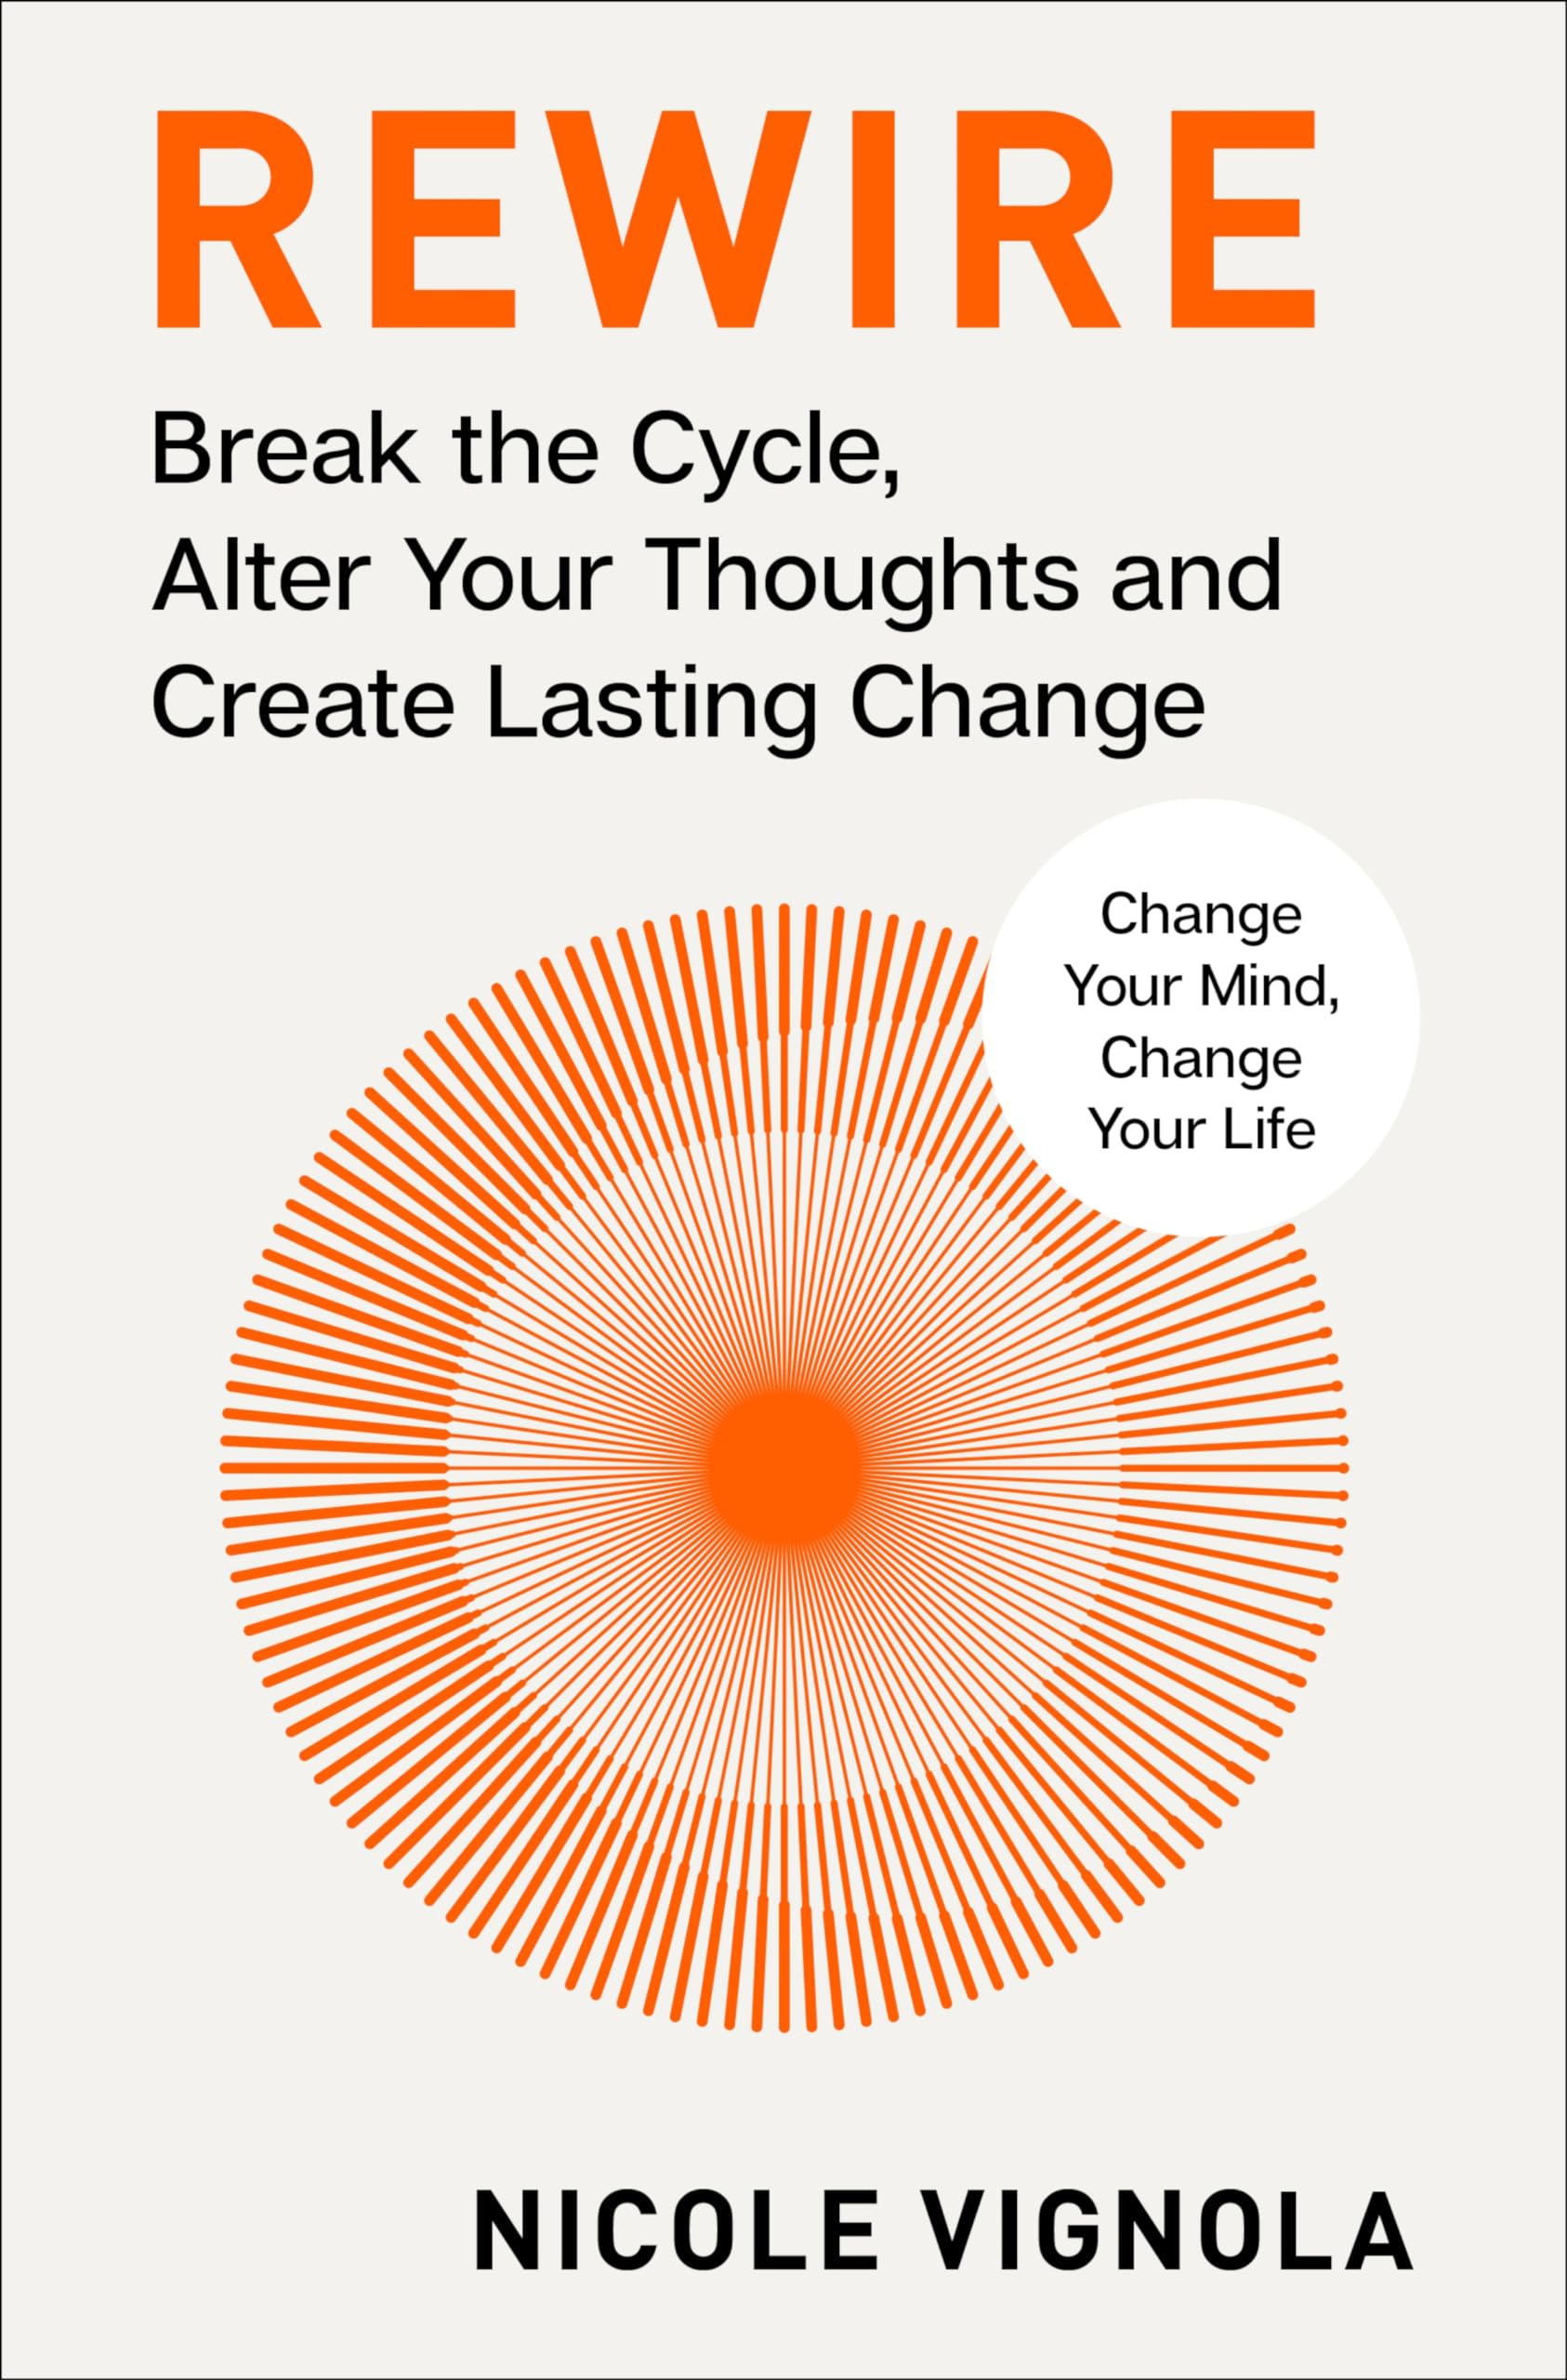 Rewire: Break the Cycle, Alter Your Thoughts and Create Lasting Change (Your Neurotoolkit for Everyday Life) by Vignola, Nicole